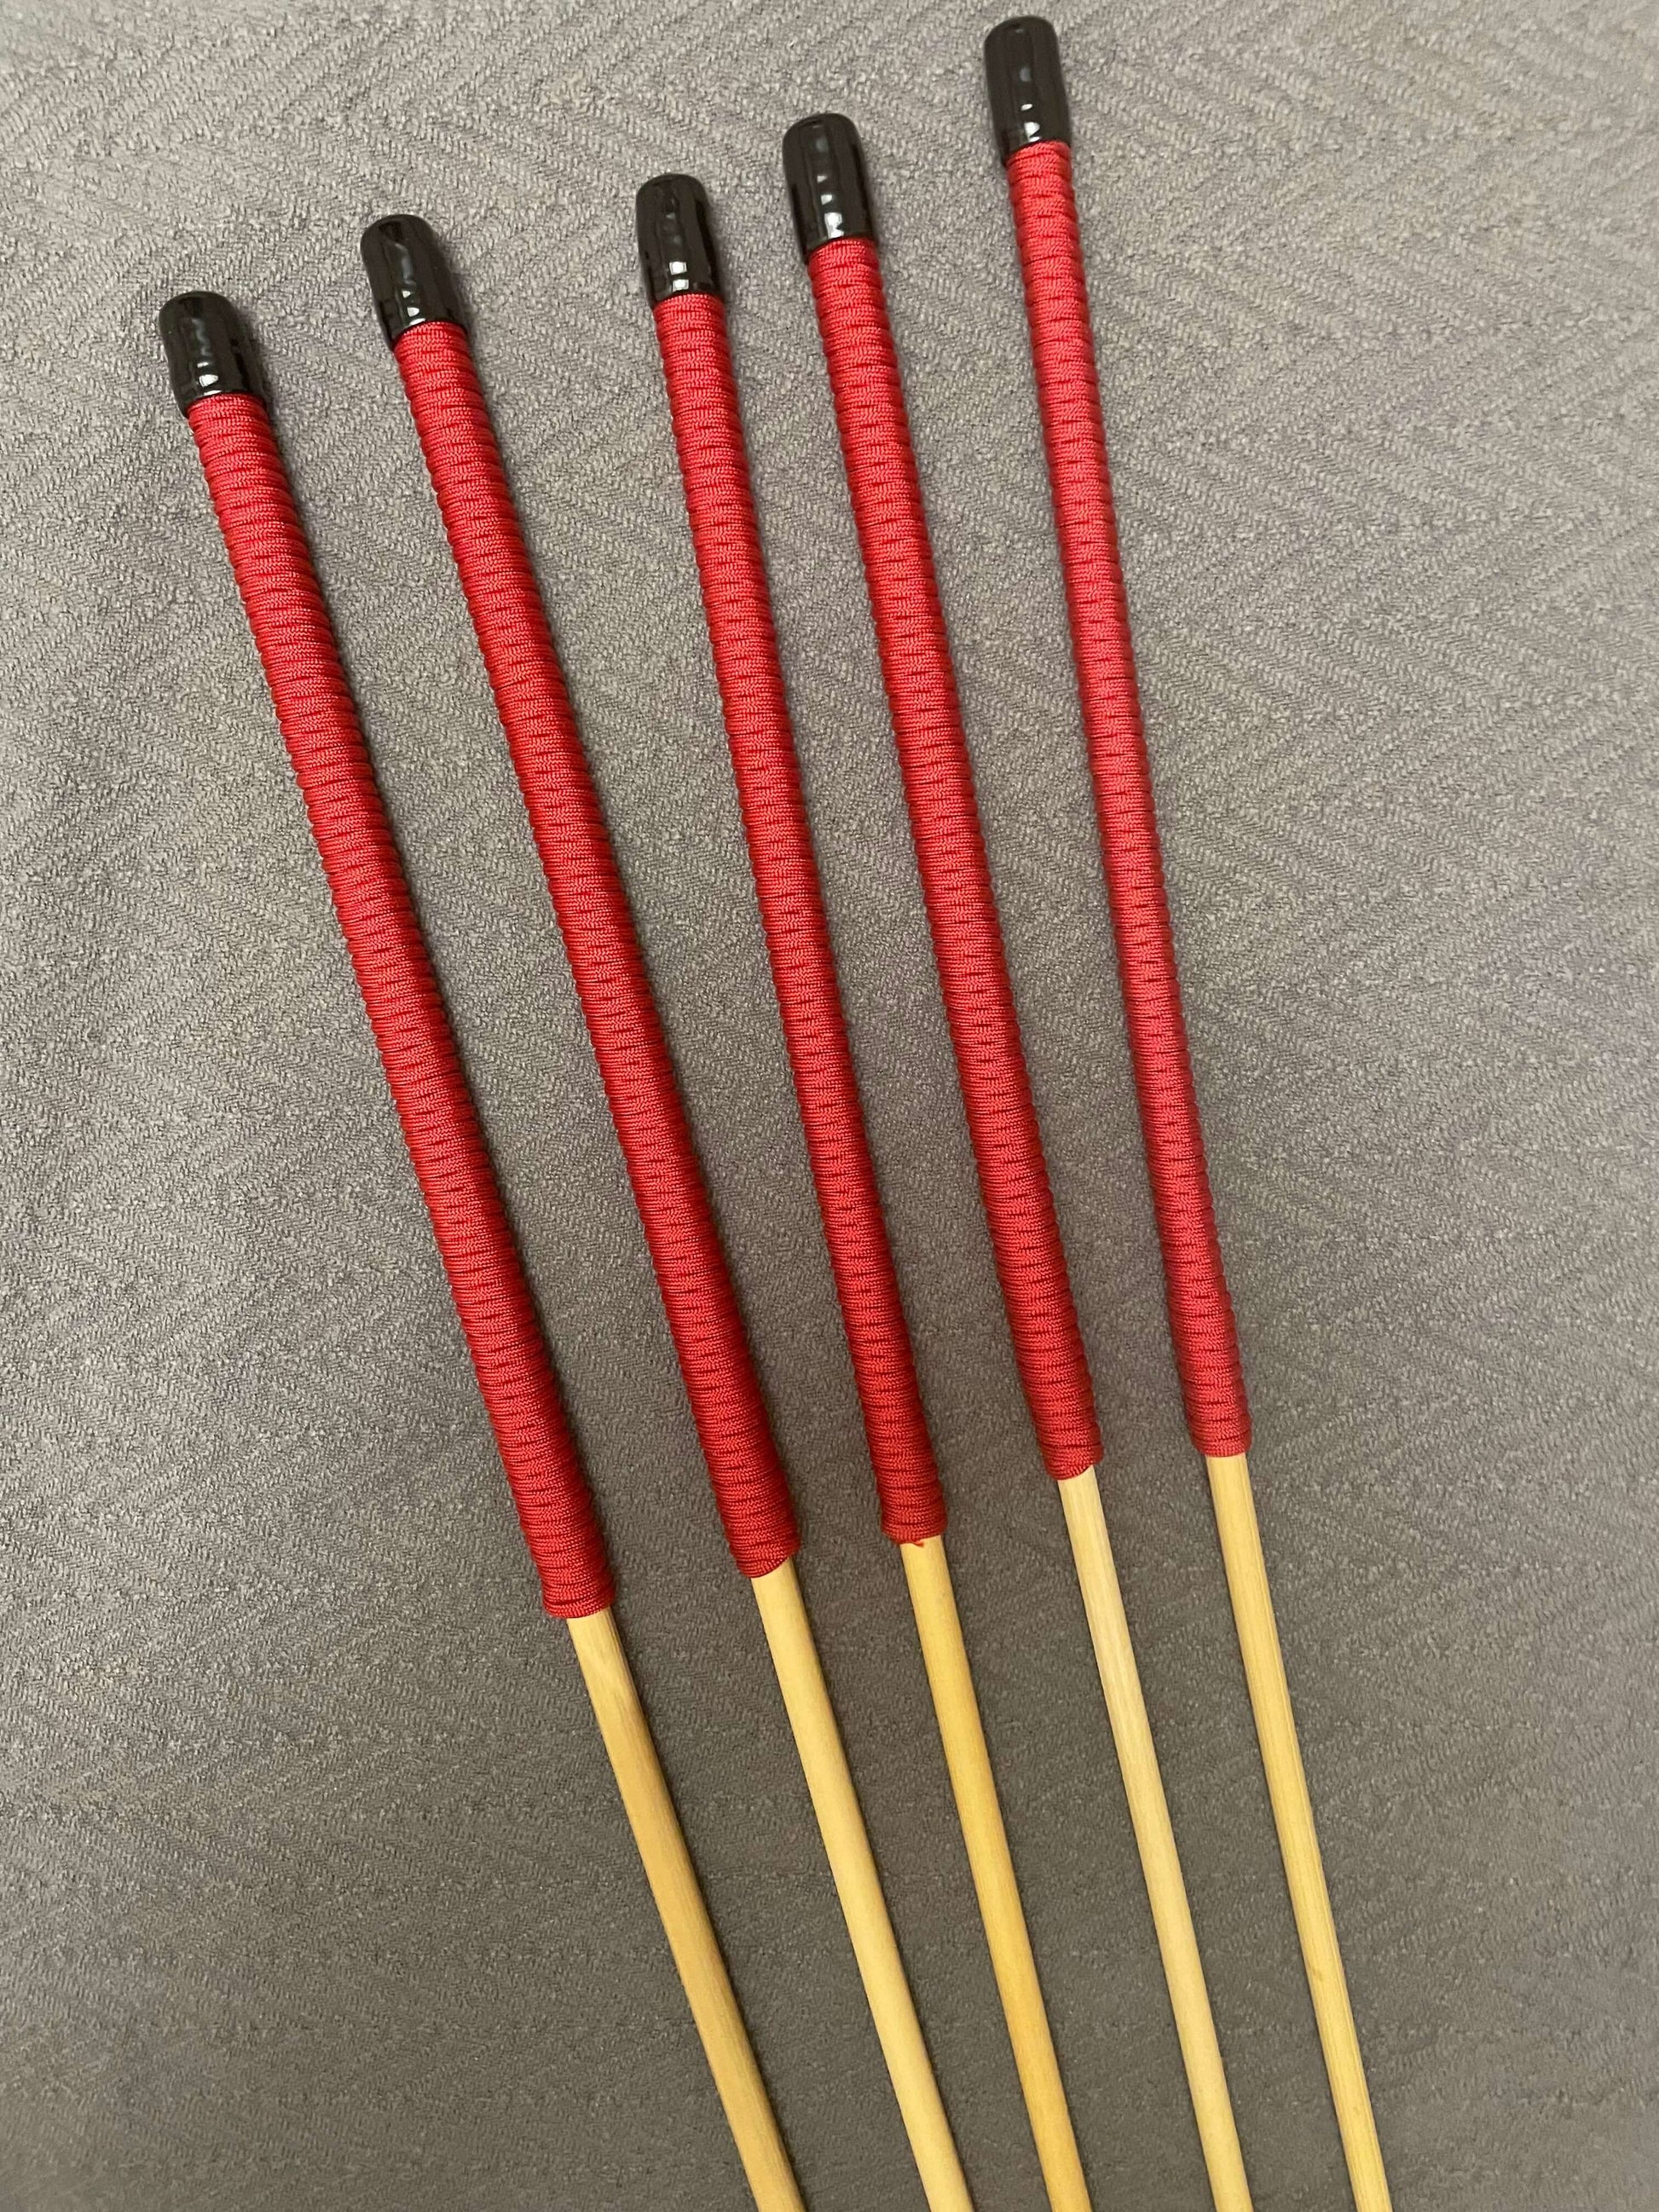 No Knot Rattan Canes / Ultimate Dragon Canes / Knotless Canes Set of 5